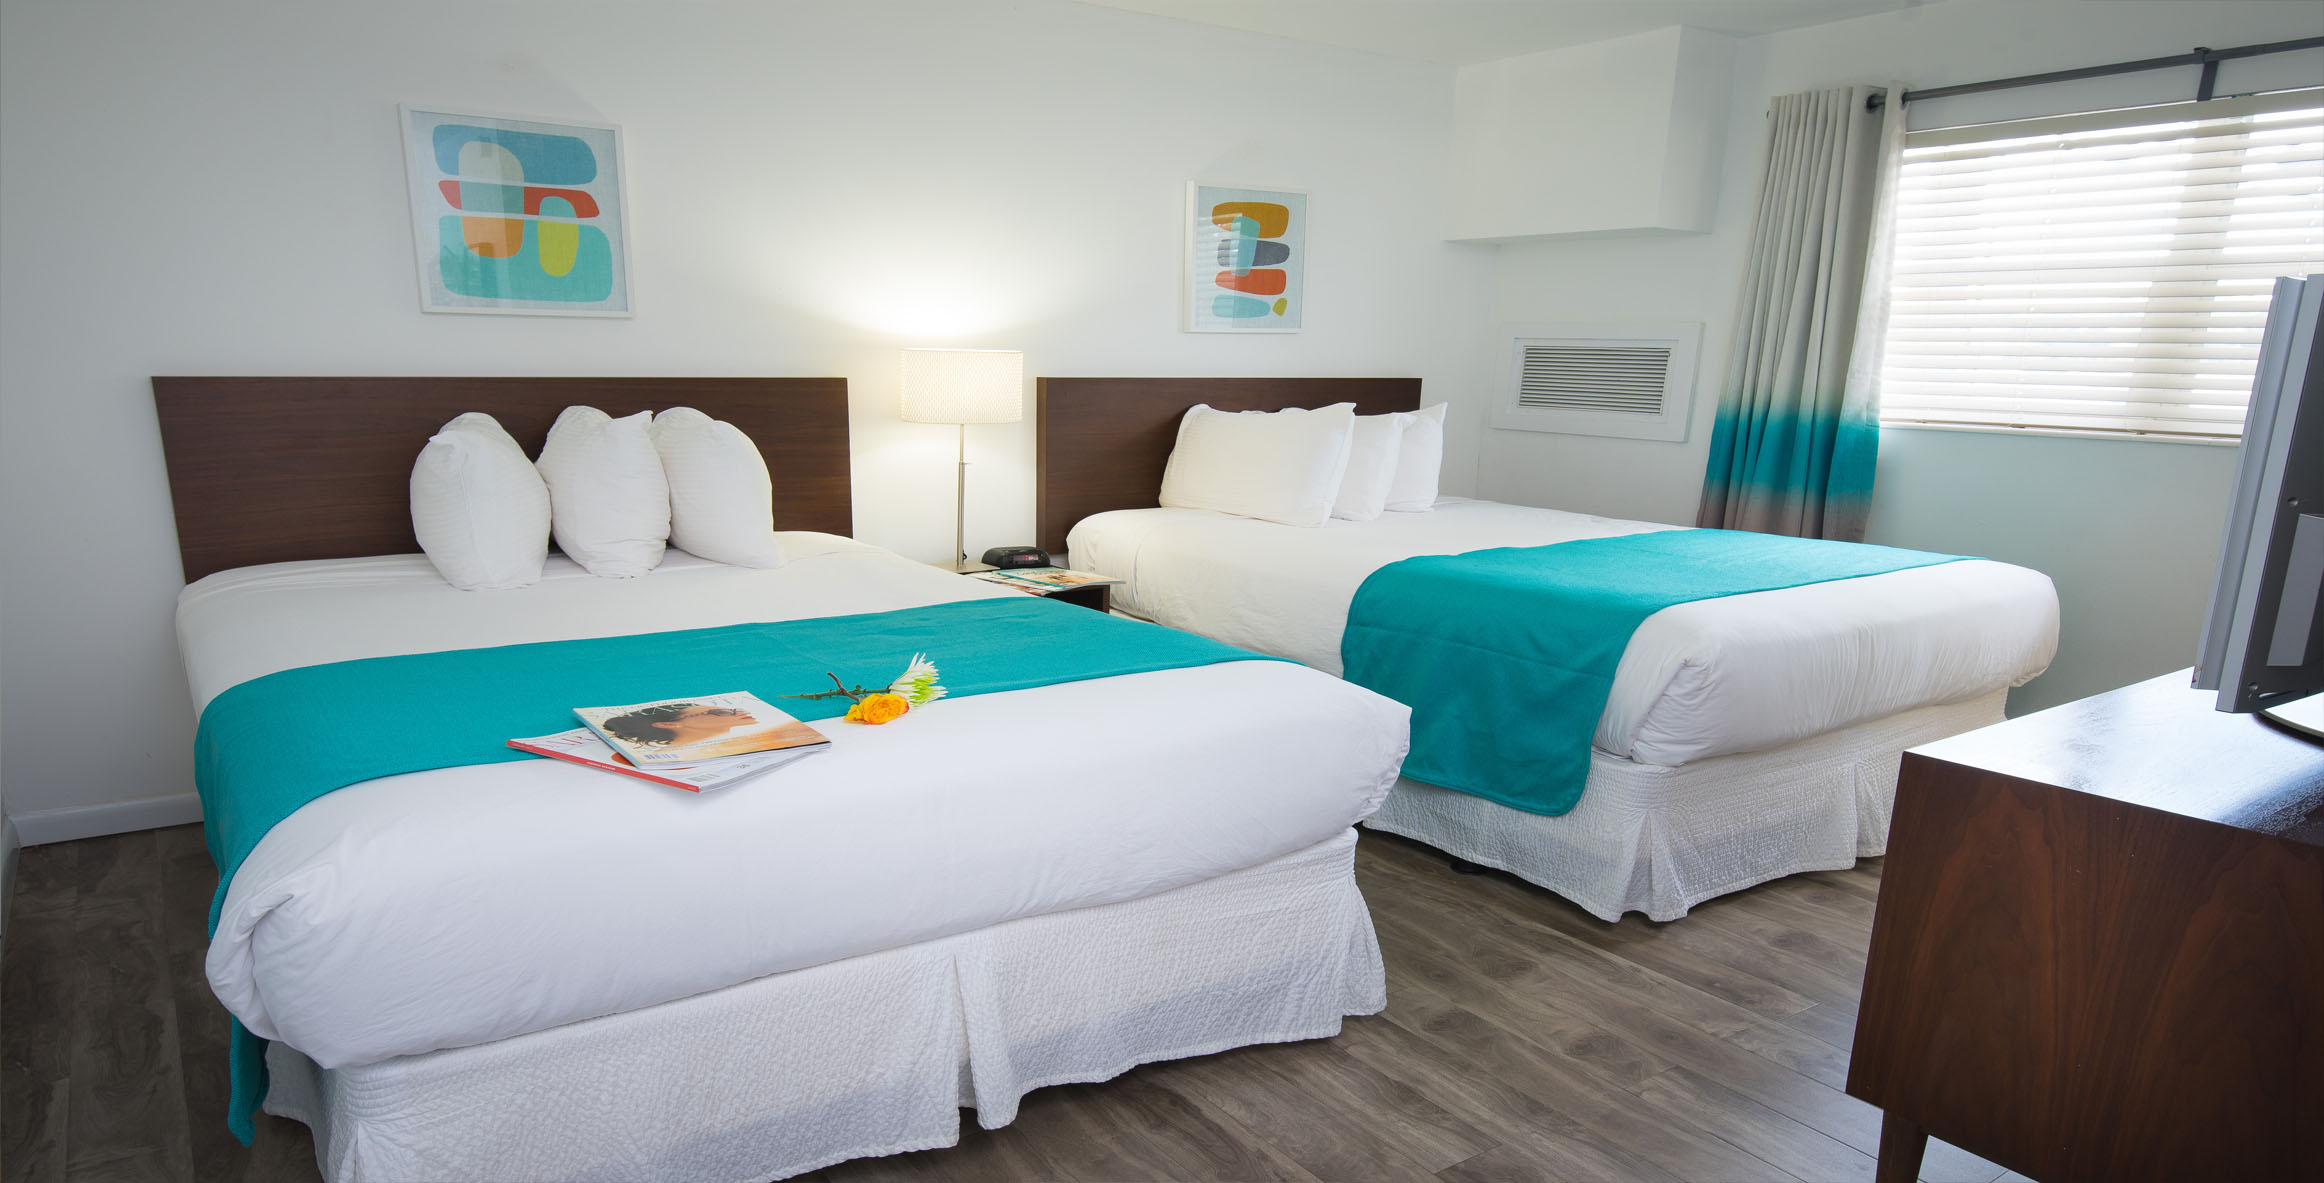 CLEAN AND COMFORTABLE GUEST ROOMS FOR YOUR FUN FILLED FLORIDA VACATION